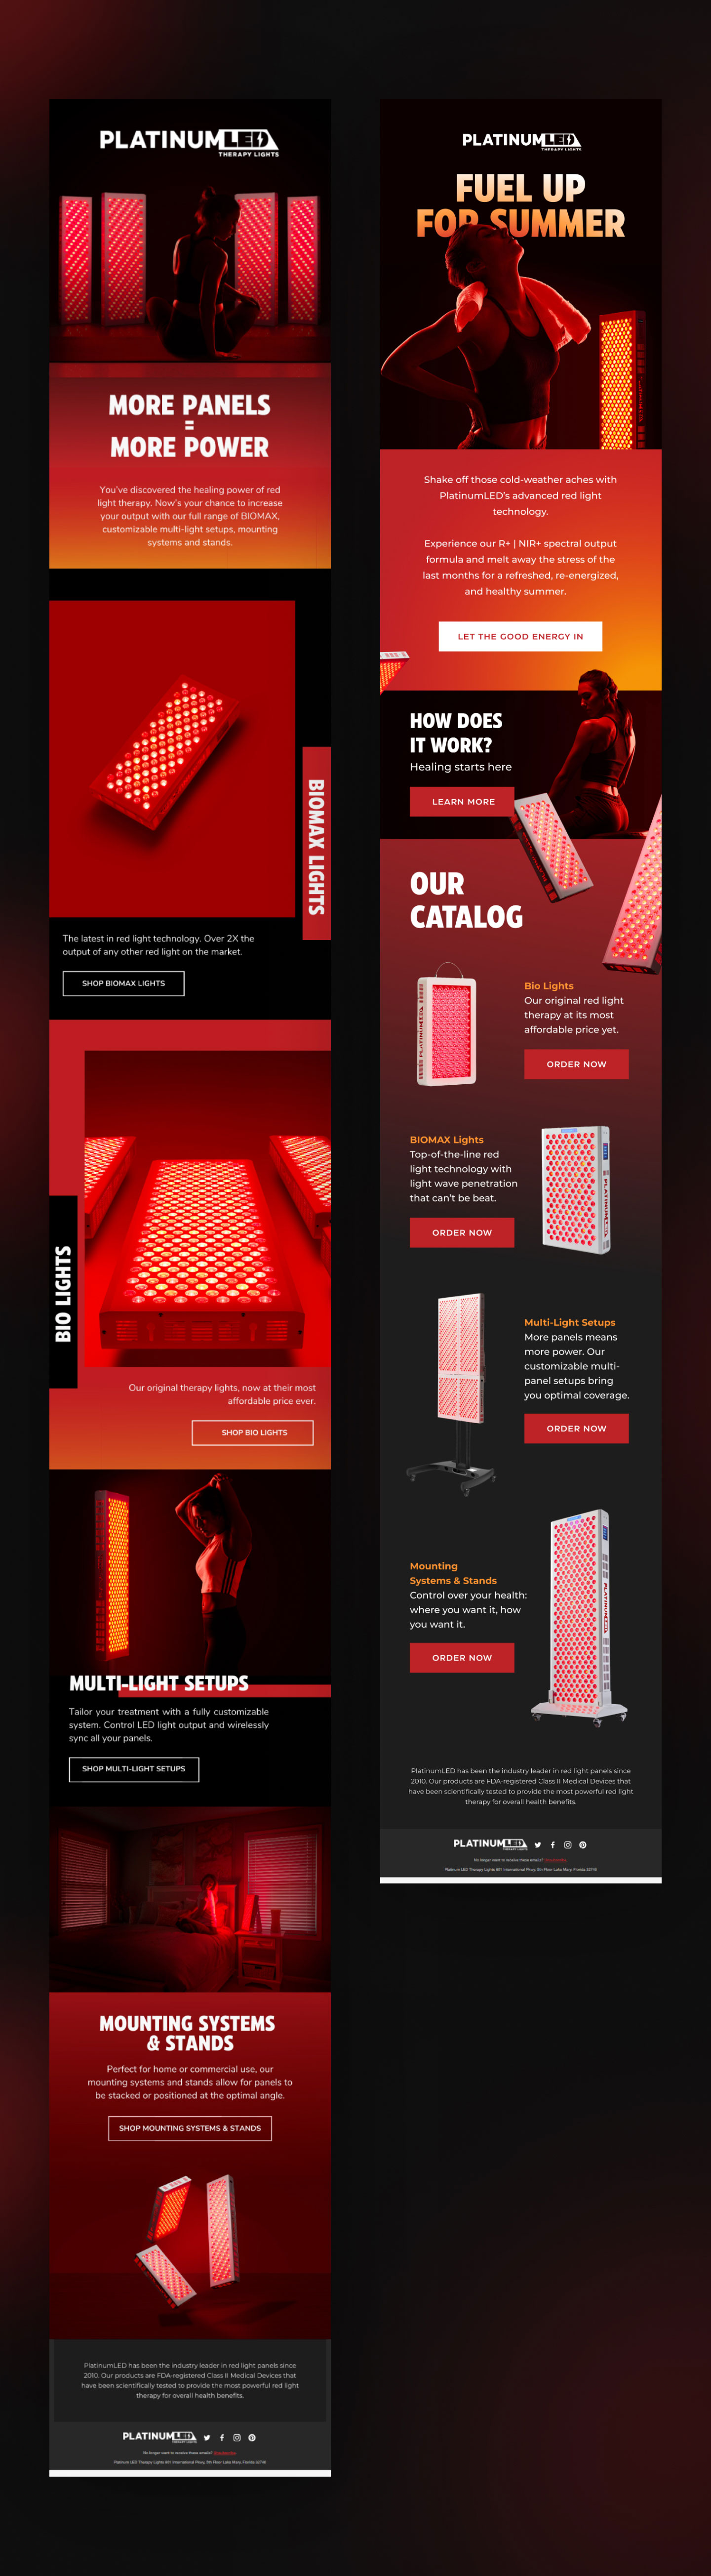 biomax red light therapy promotion series technical specifications and instructions